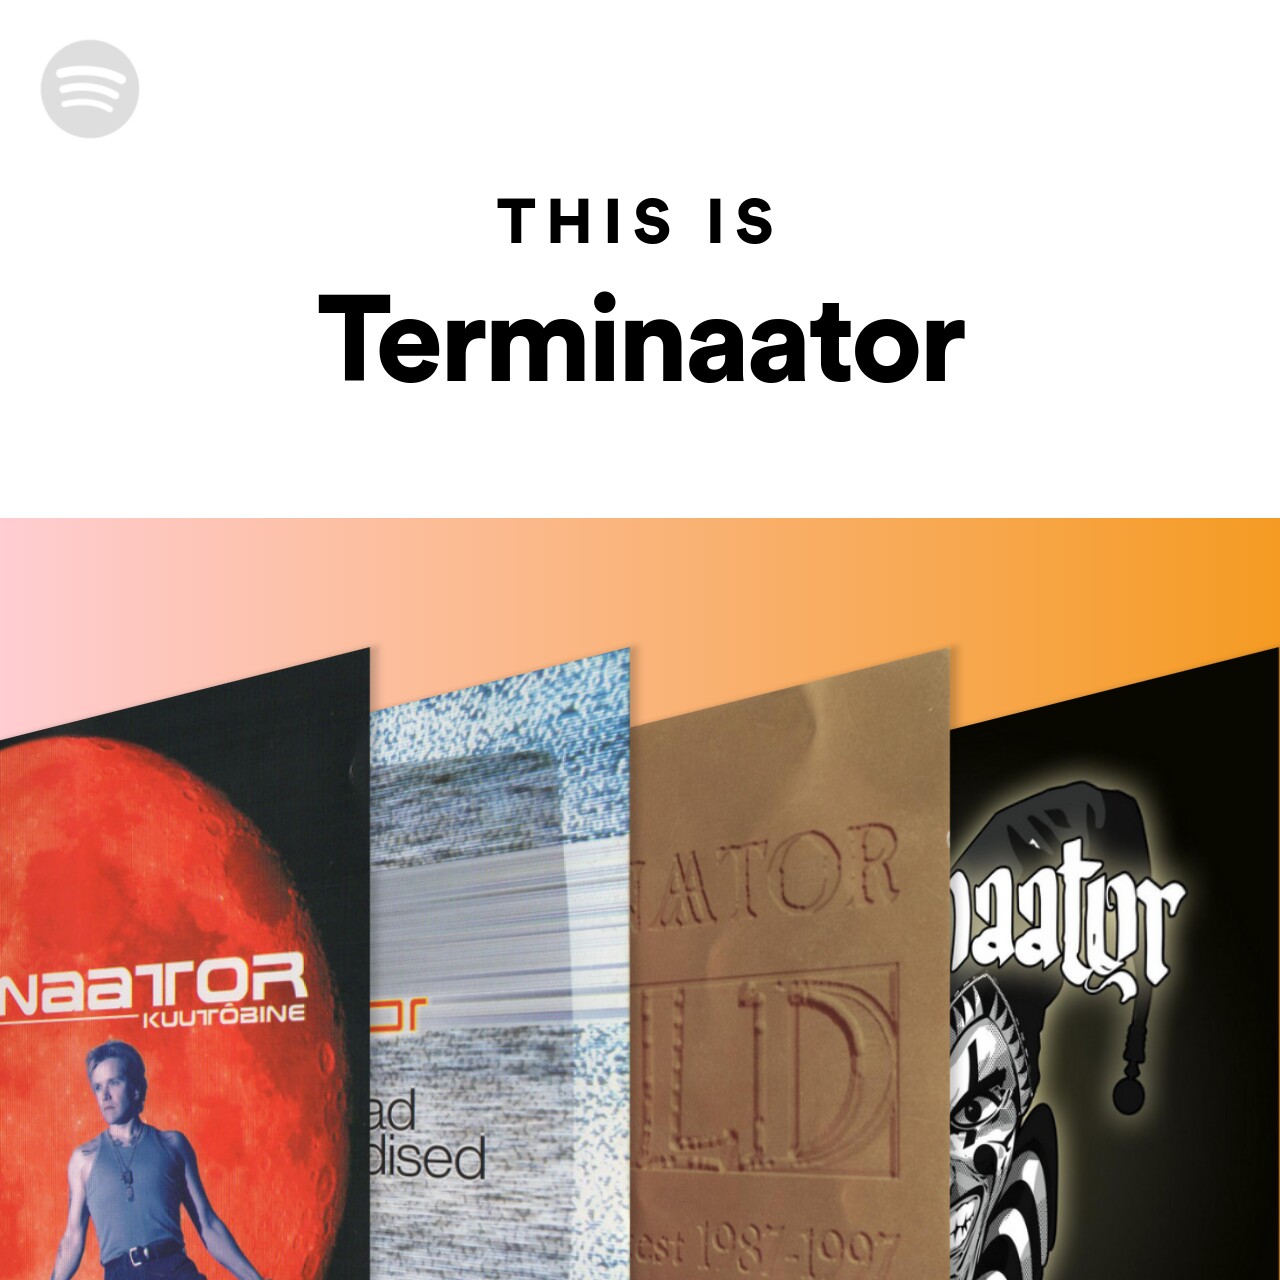 This Is Terminaator